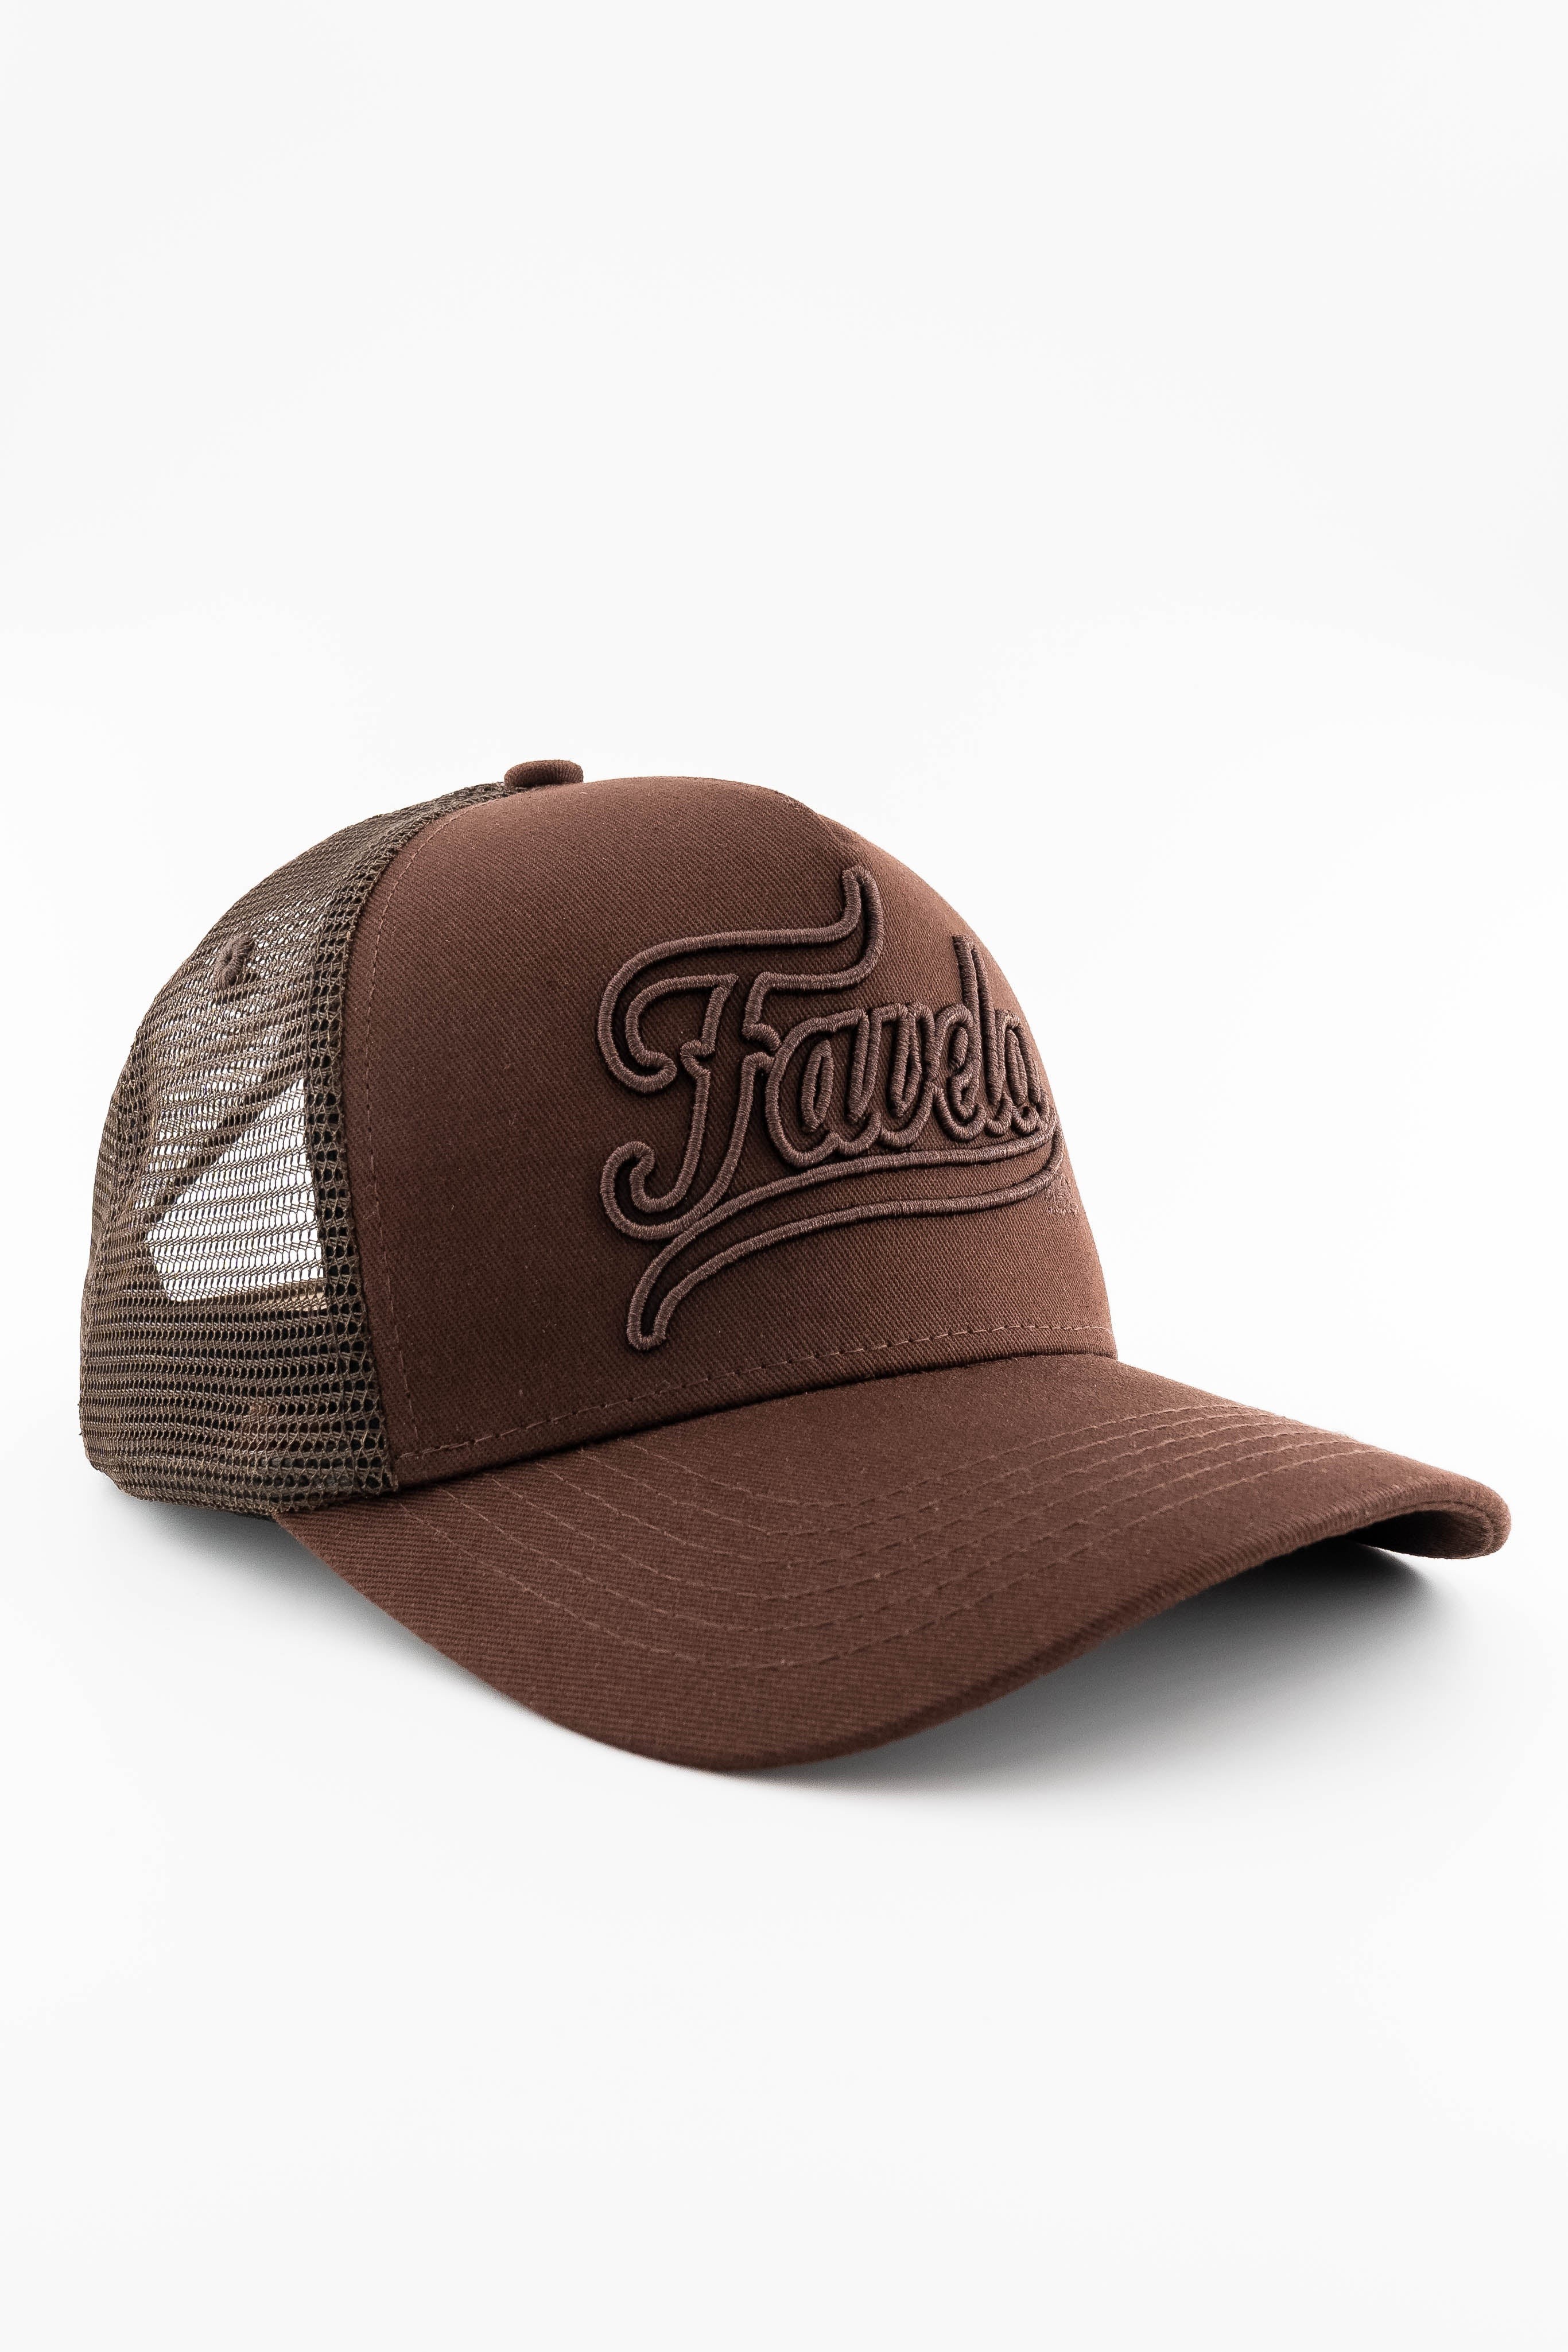 Embroidered Trucker Cap (TRCKR2)